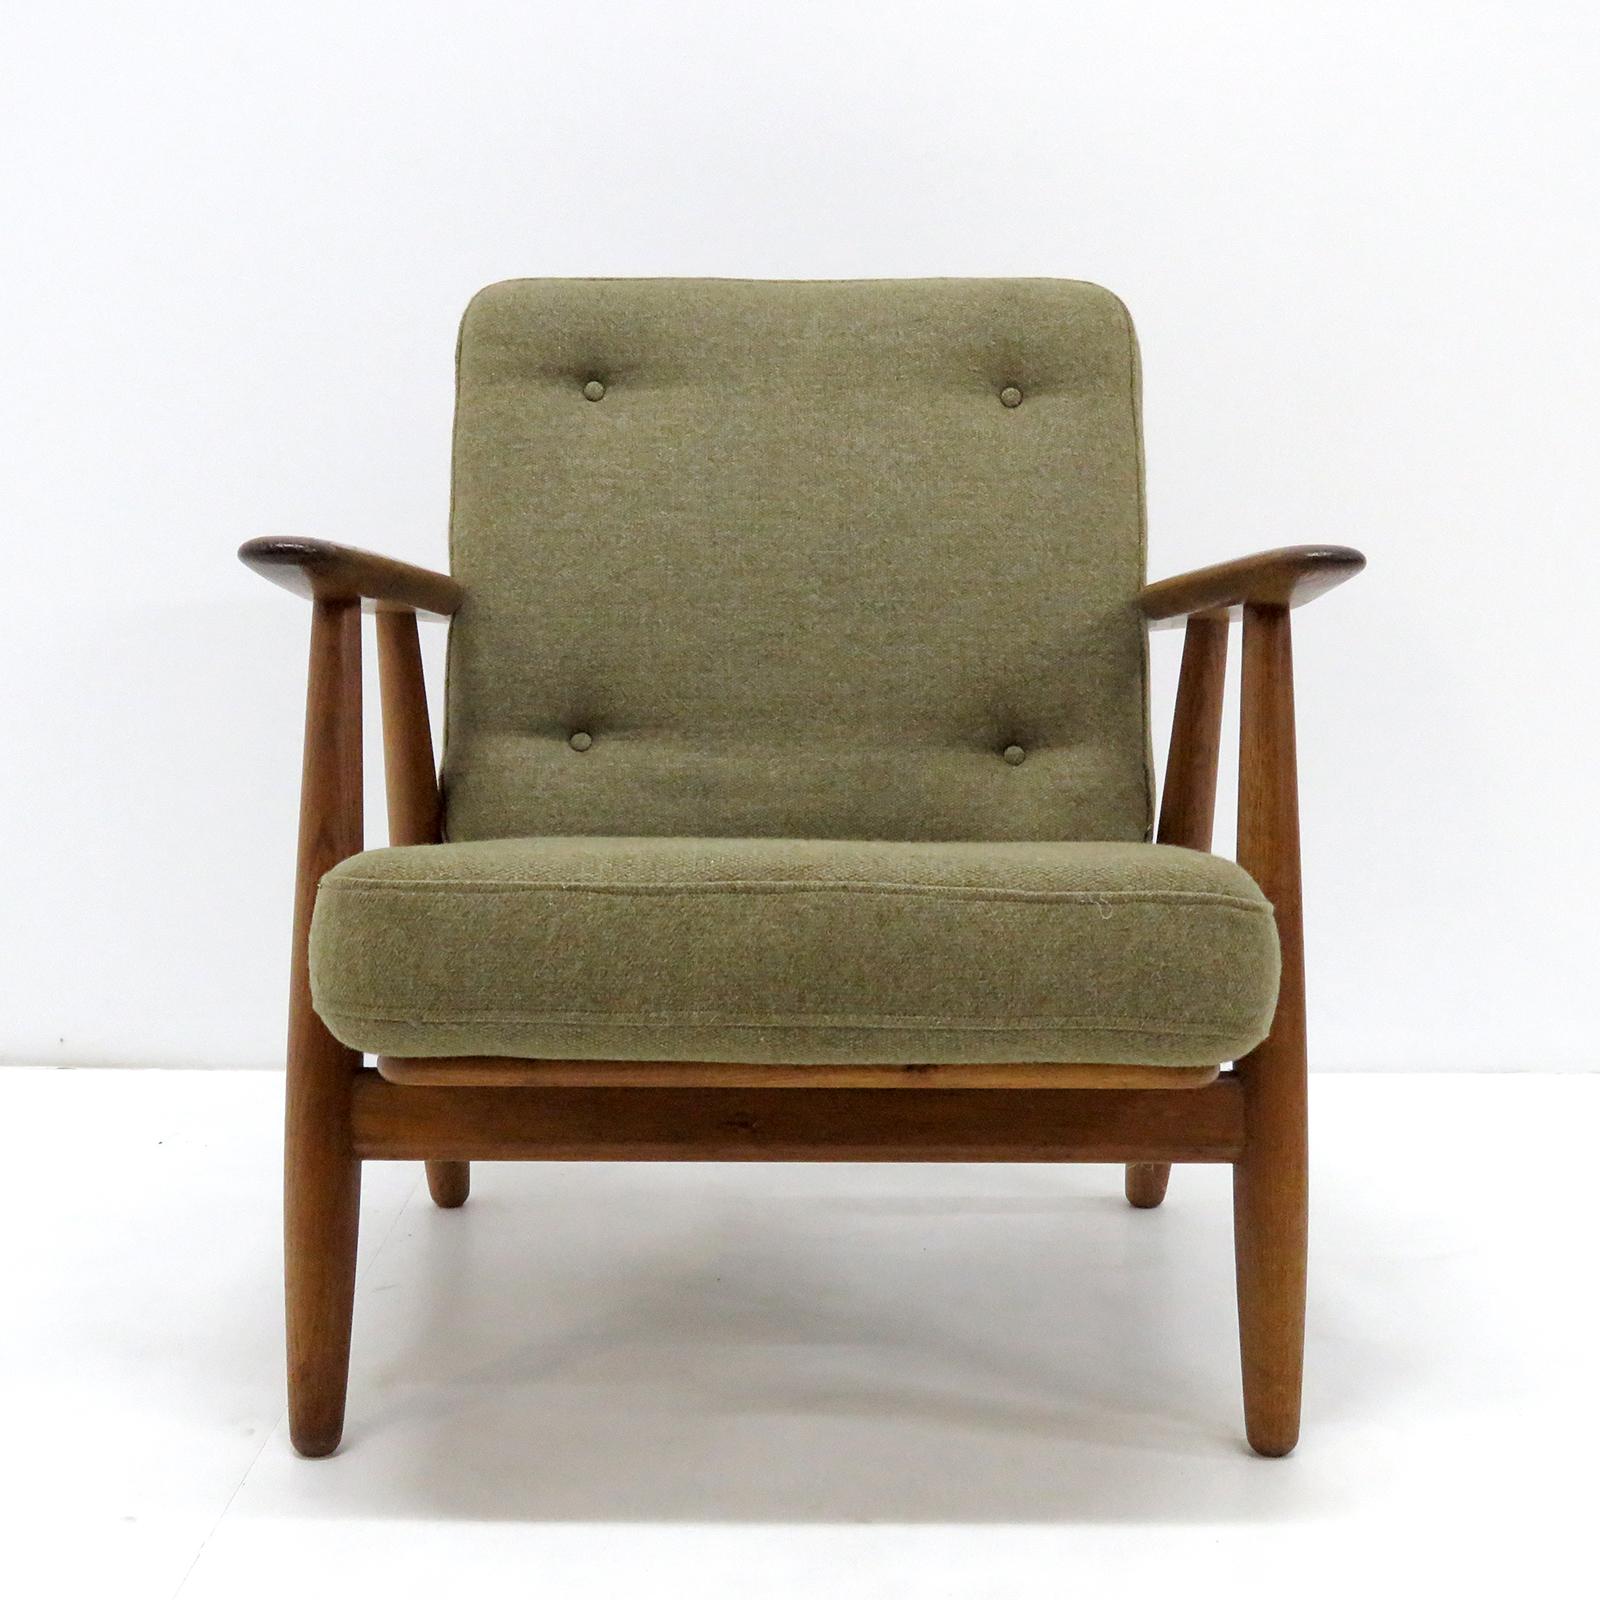 Large-scale Model GE-240 armchairs 'Cigar', designed by Hans Wegner for GETAMA in 1955 with solid oak frames and original cushions in greenish wool, marked. Priced individually.